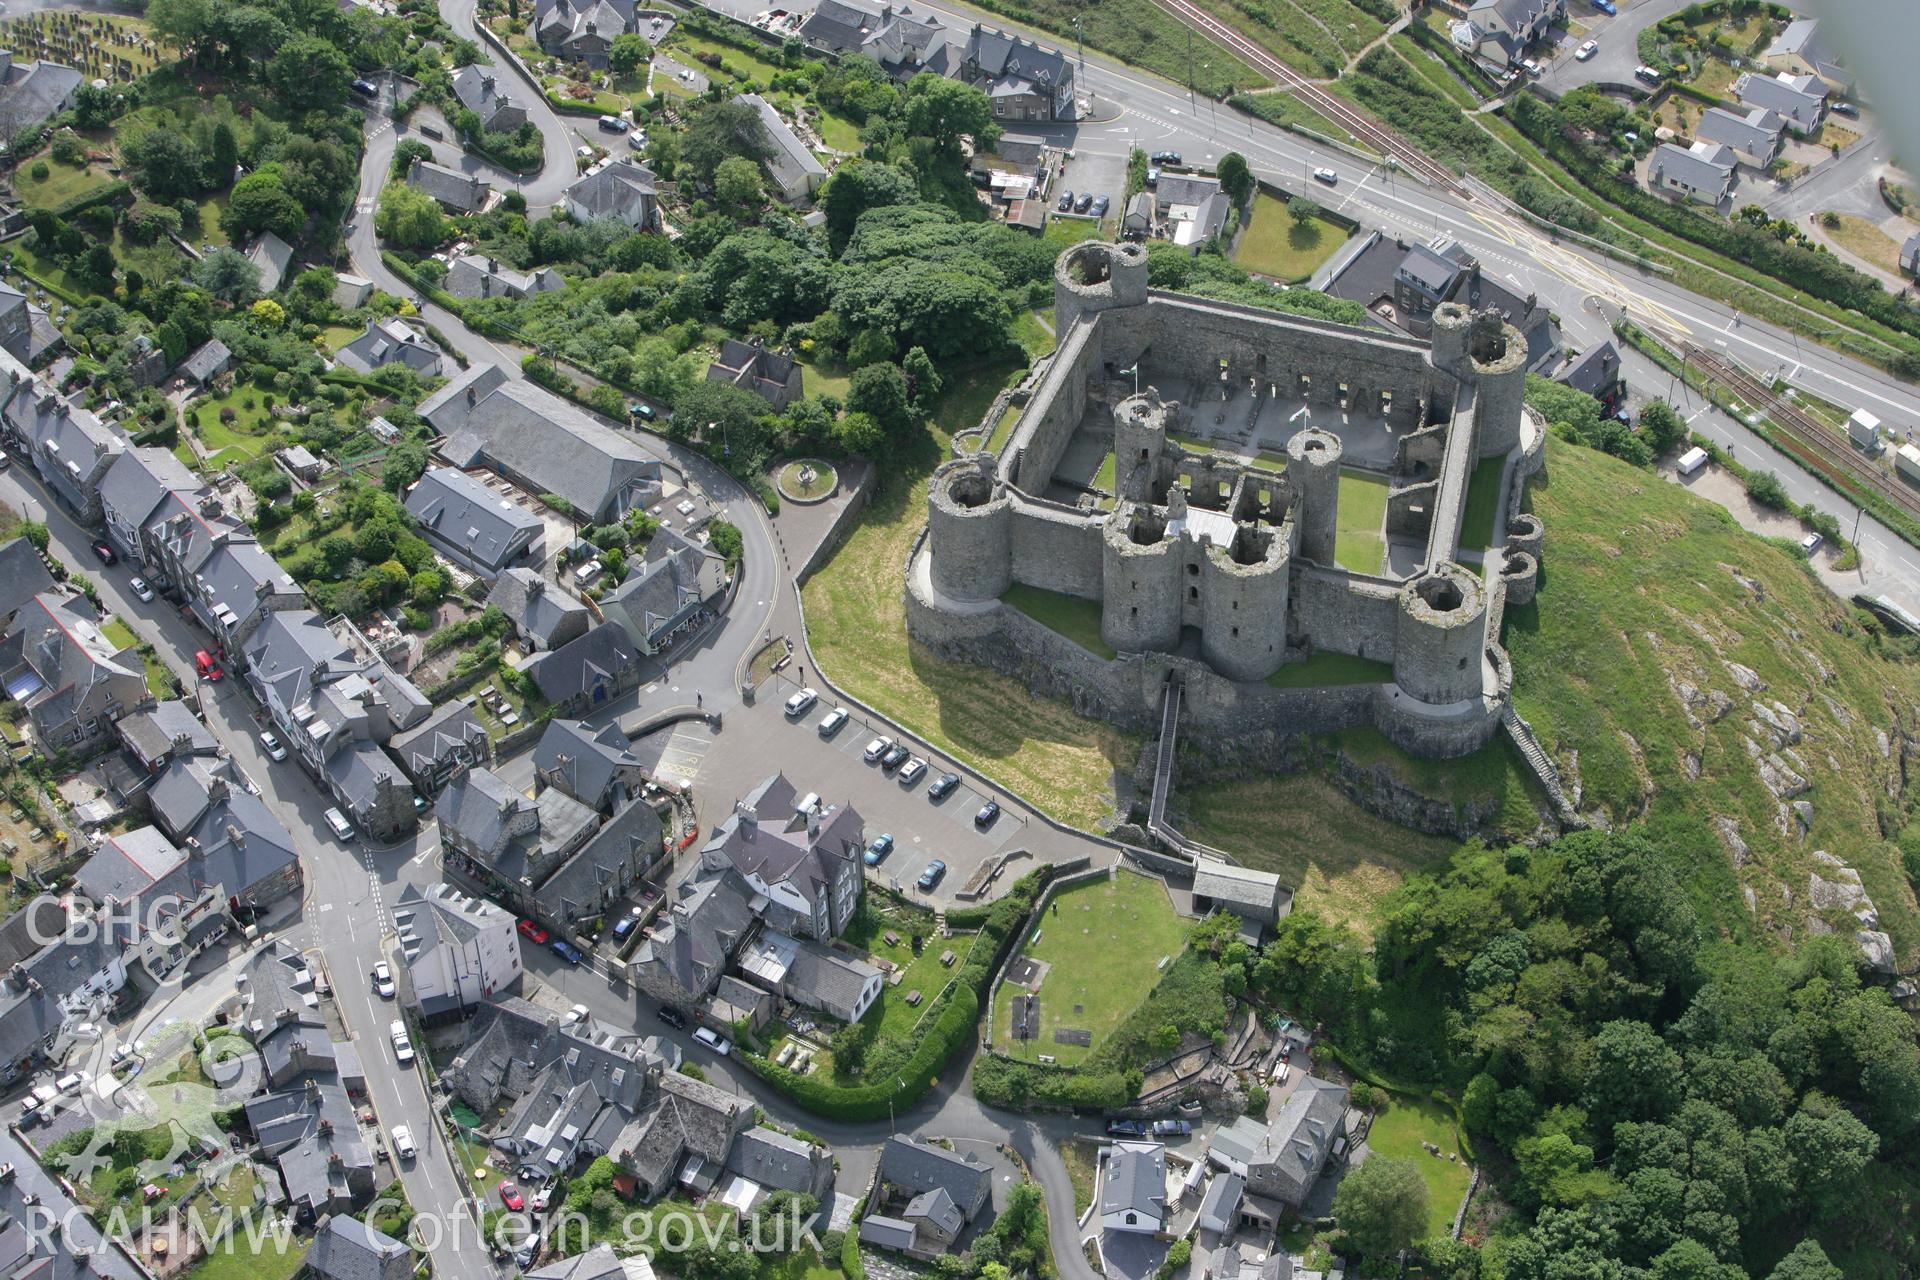 RCAHMW colour oblique photograph of Harlech Castle. Taken by Toby Driver on 13/06/2008.